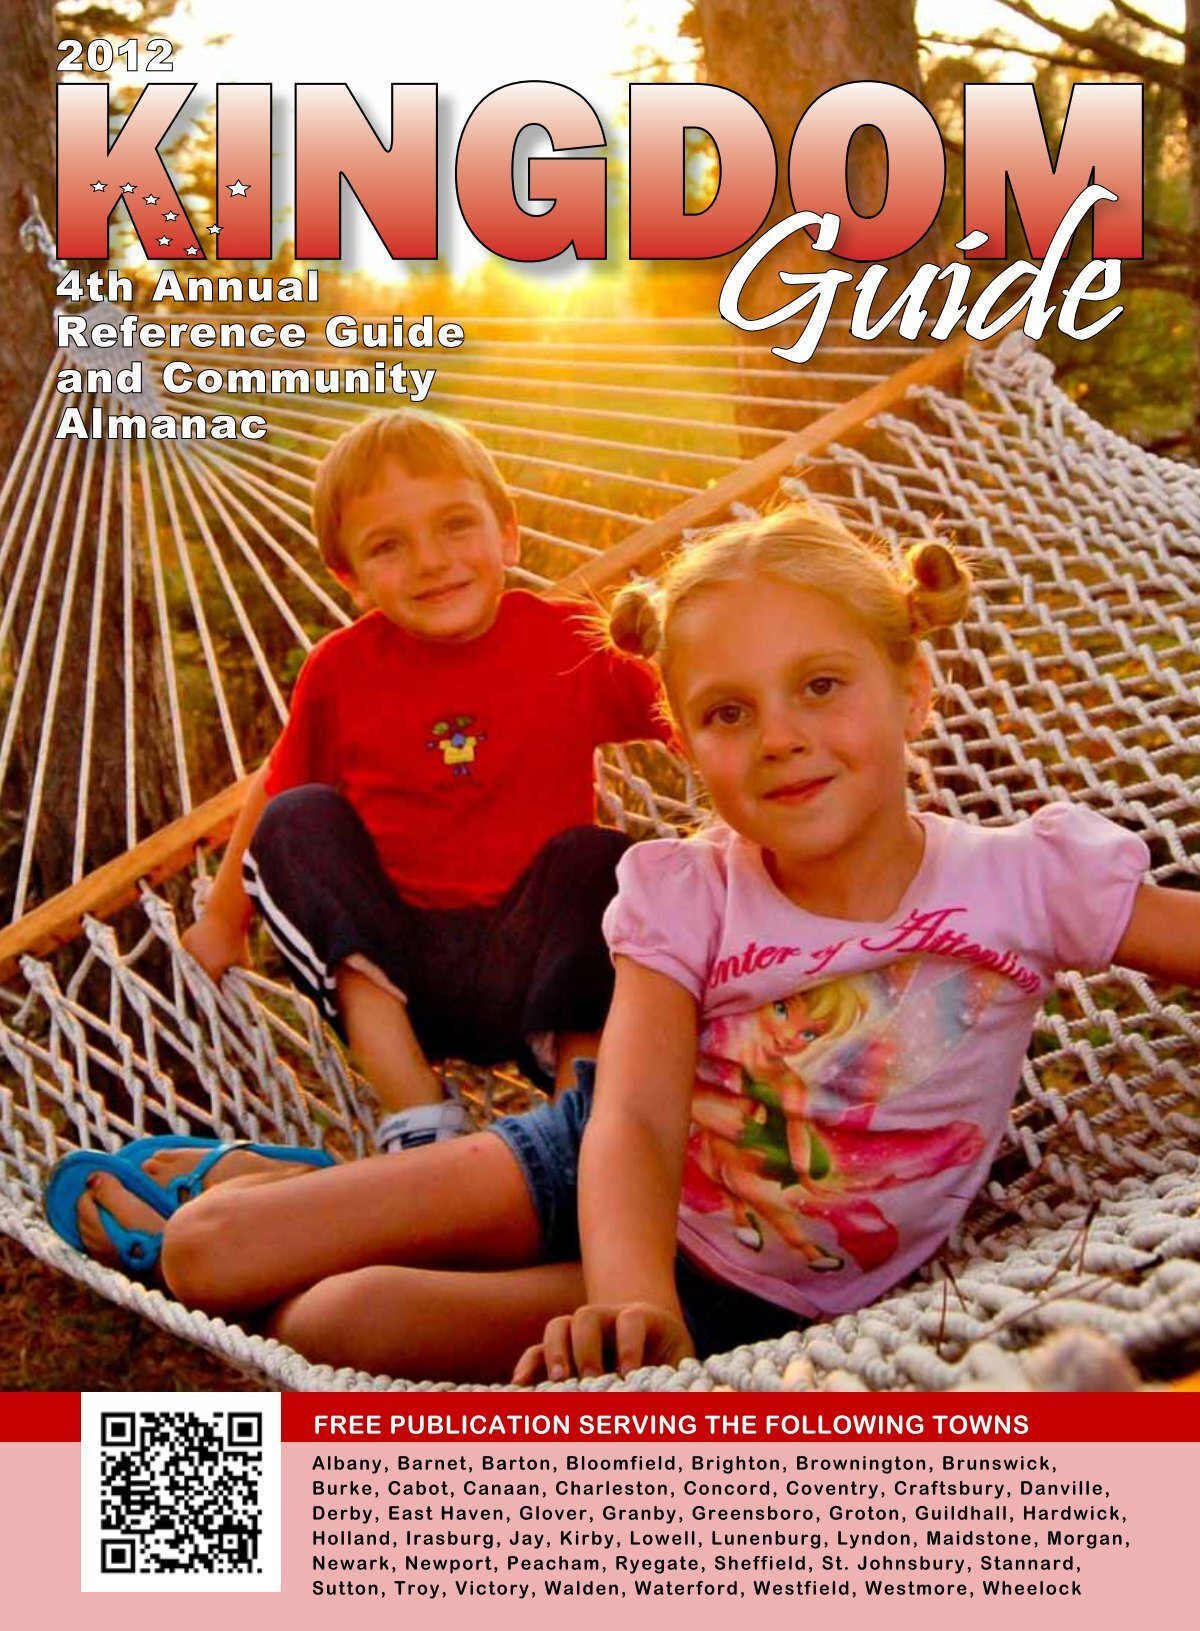 4th Annual Reference Guide and Community Almanac 2012